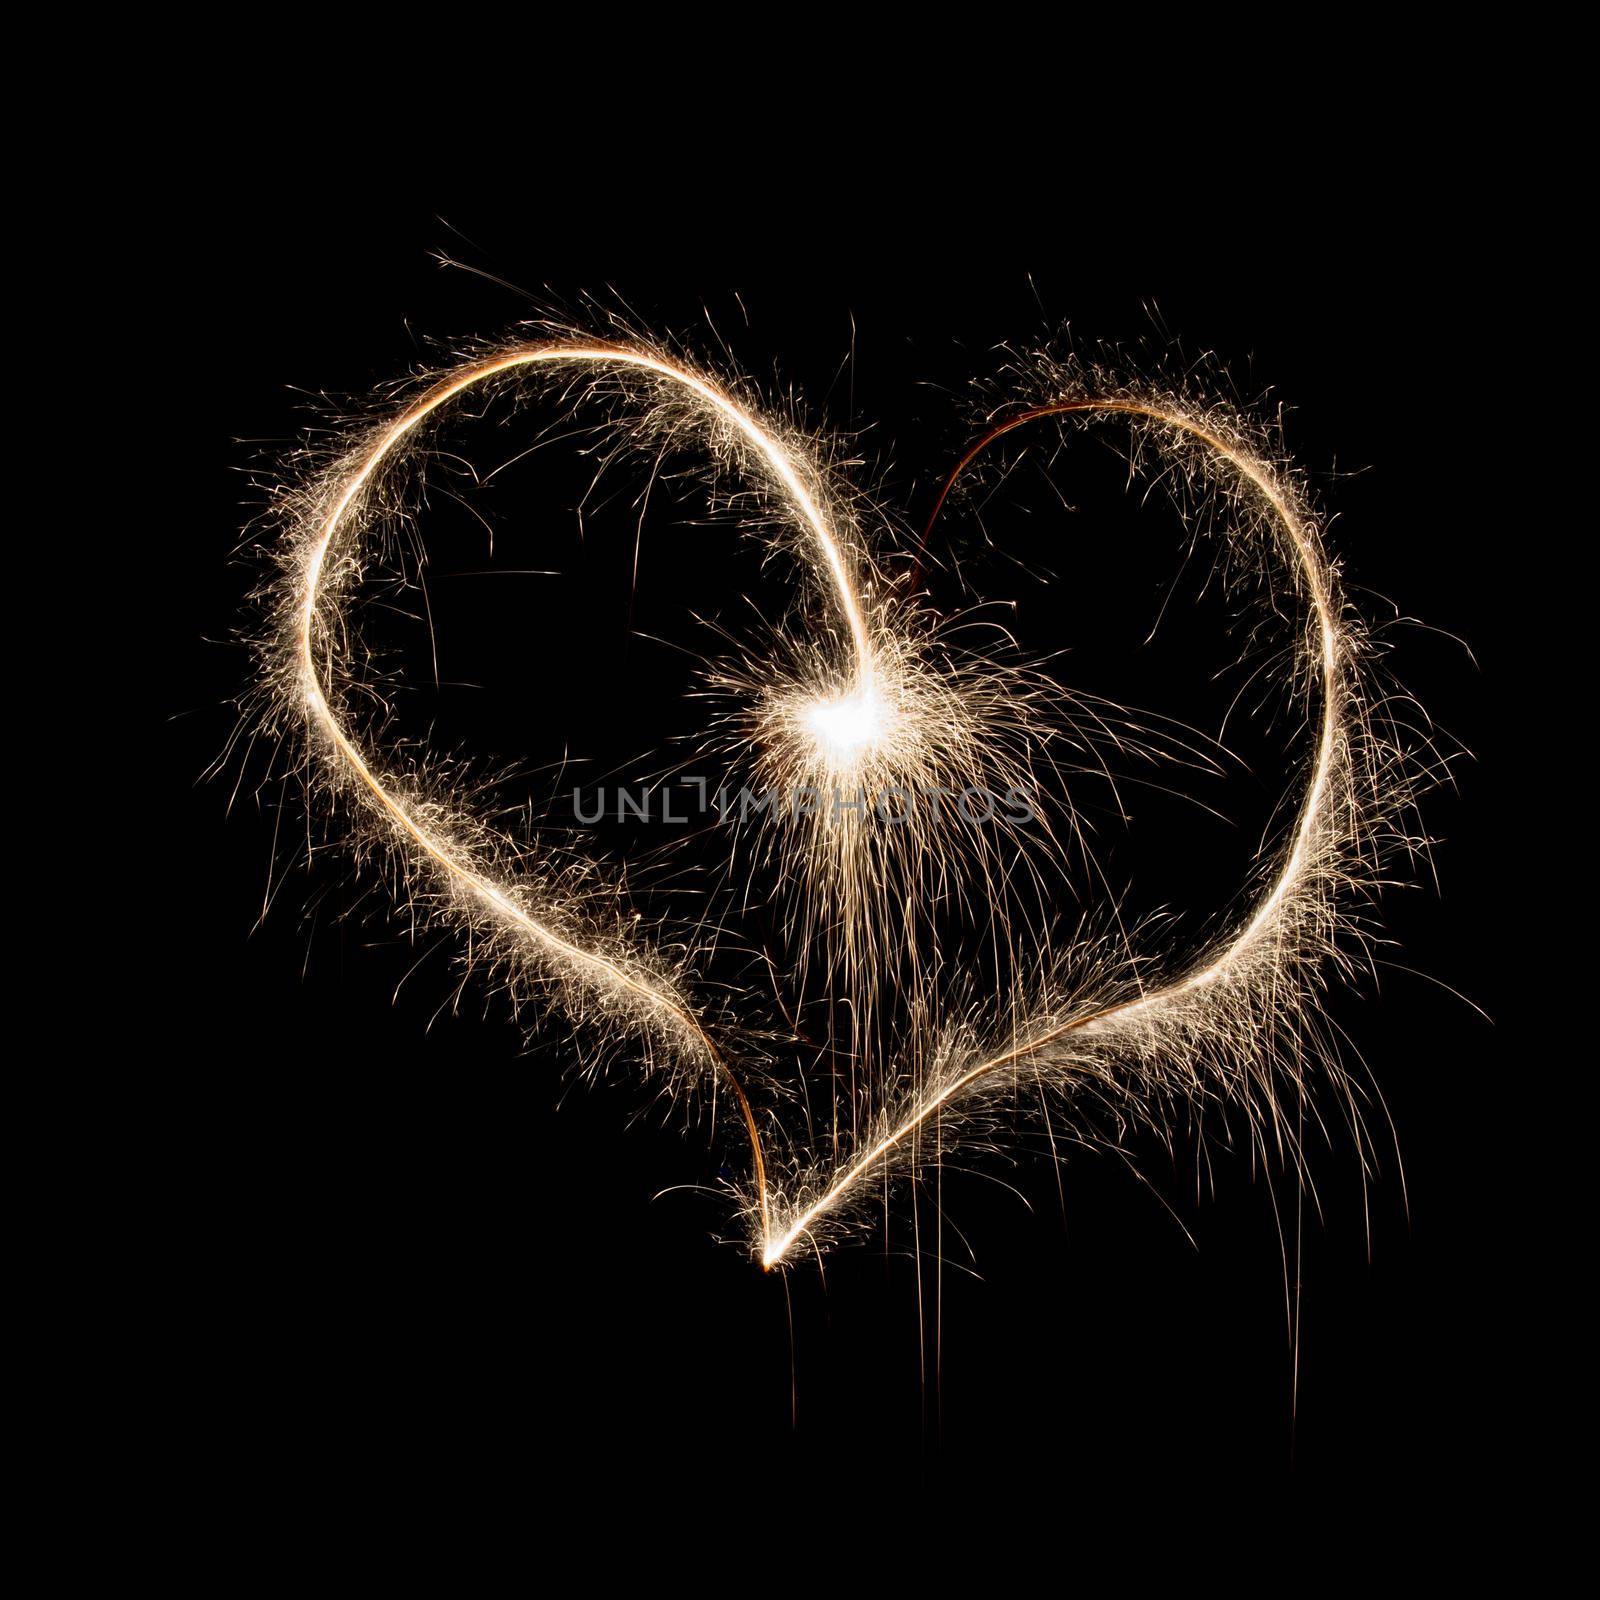 Heart shape made of sparkles on black background on holiday